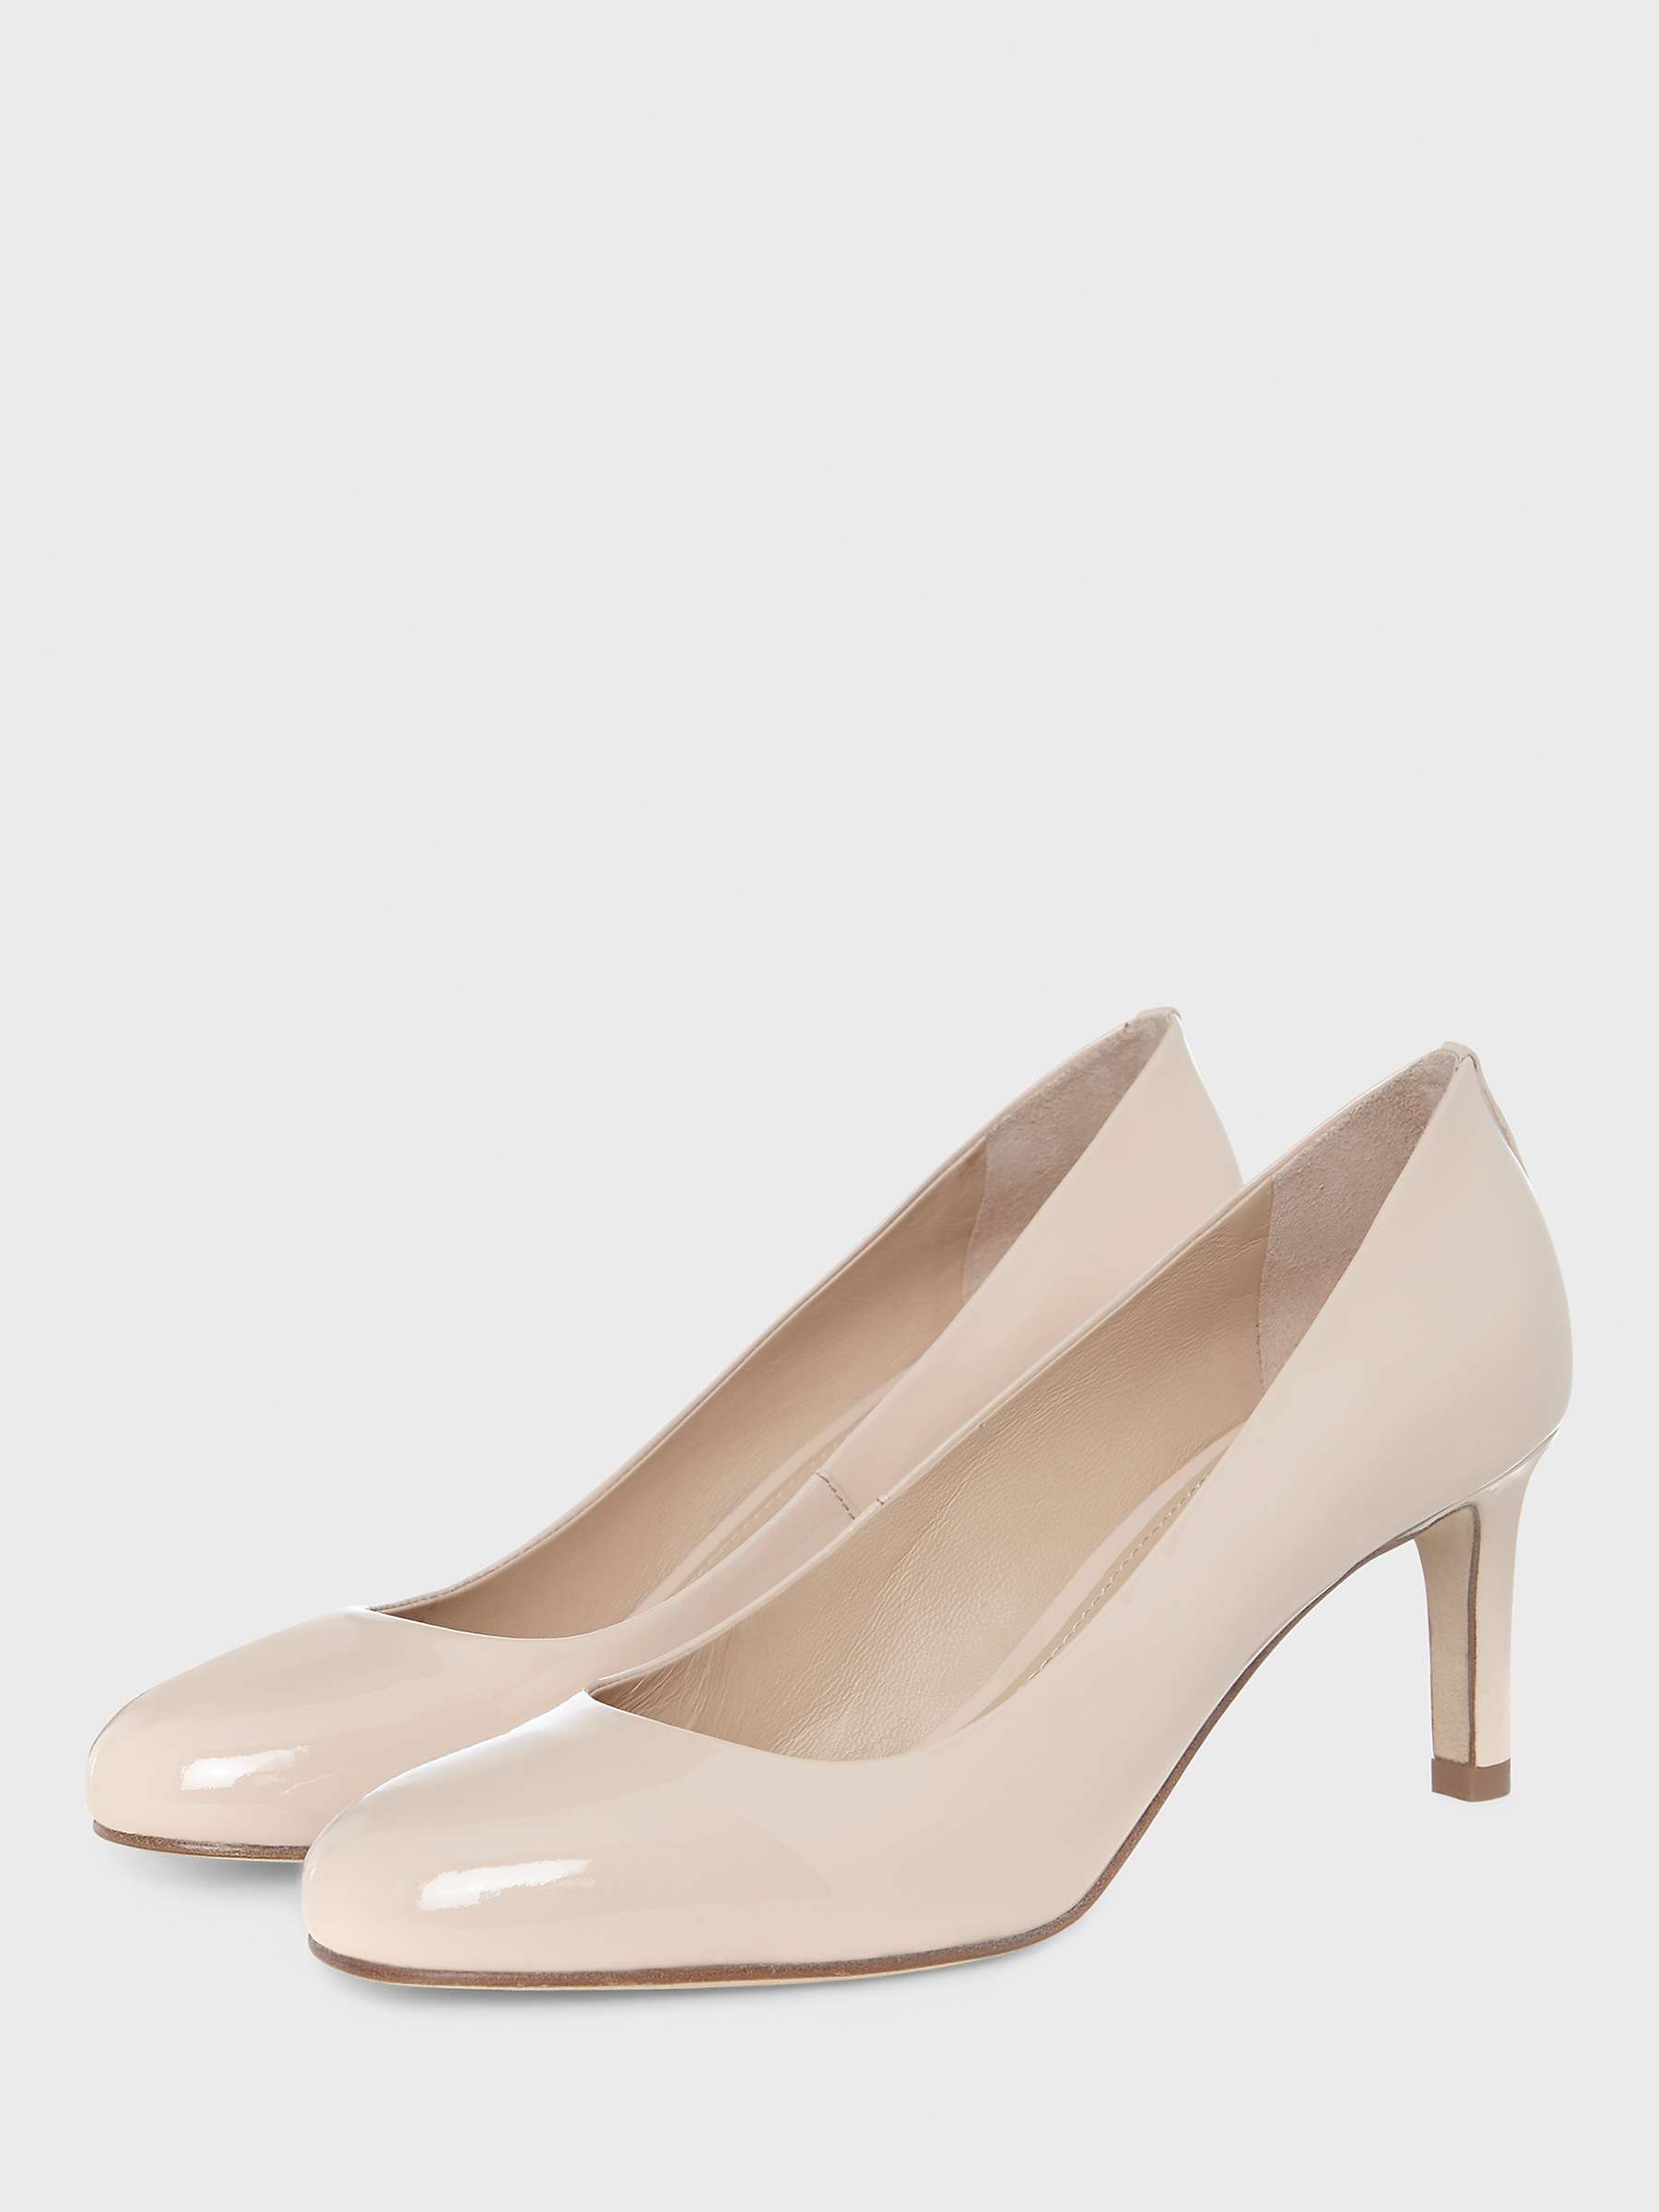 Hobbs Lizzie Suede Court Shoes, Nude at John Lewis & Partners